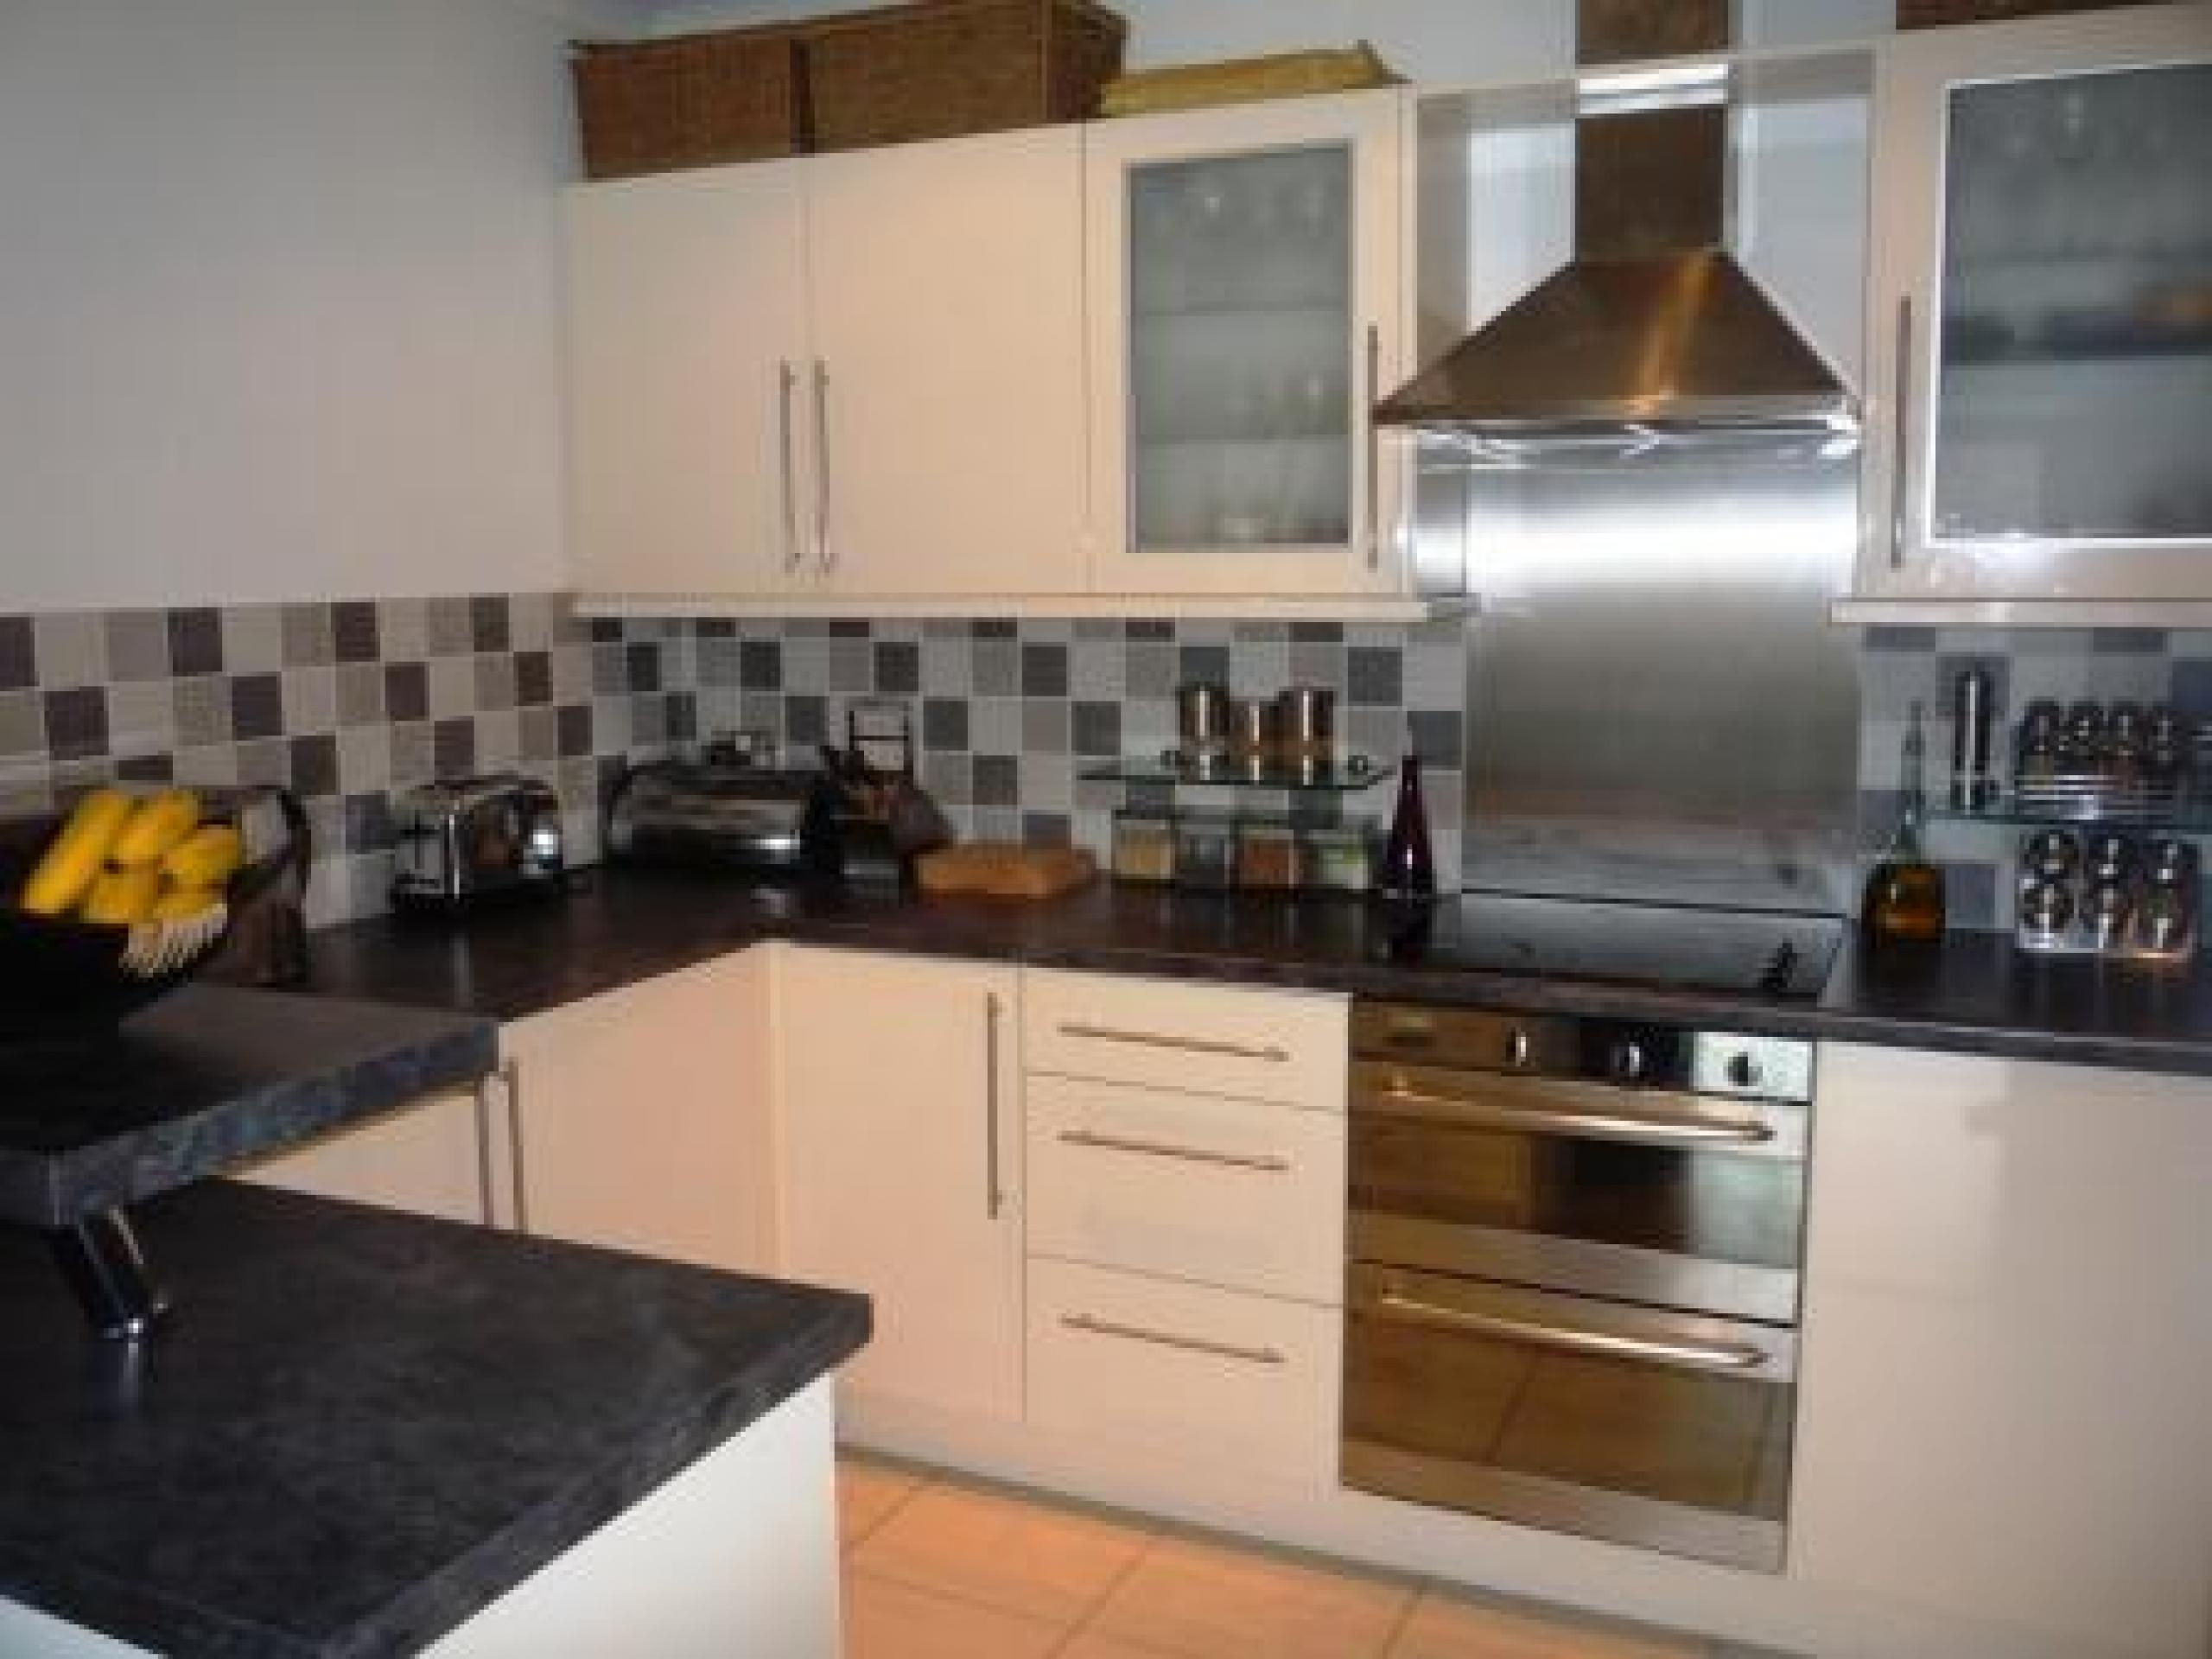 			2 Bedroom, 1 bath, 1 reception Apartment			 Northpoint, CROUCH END N8